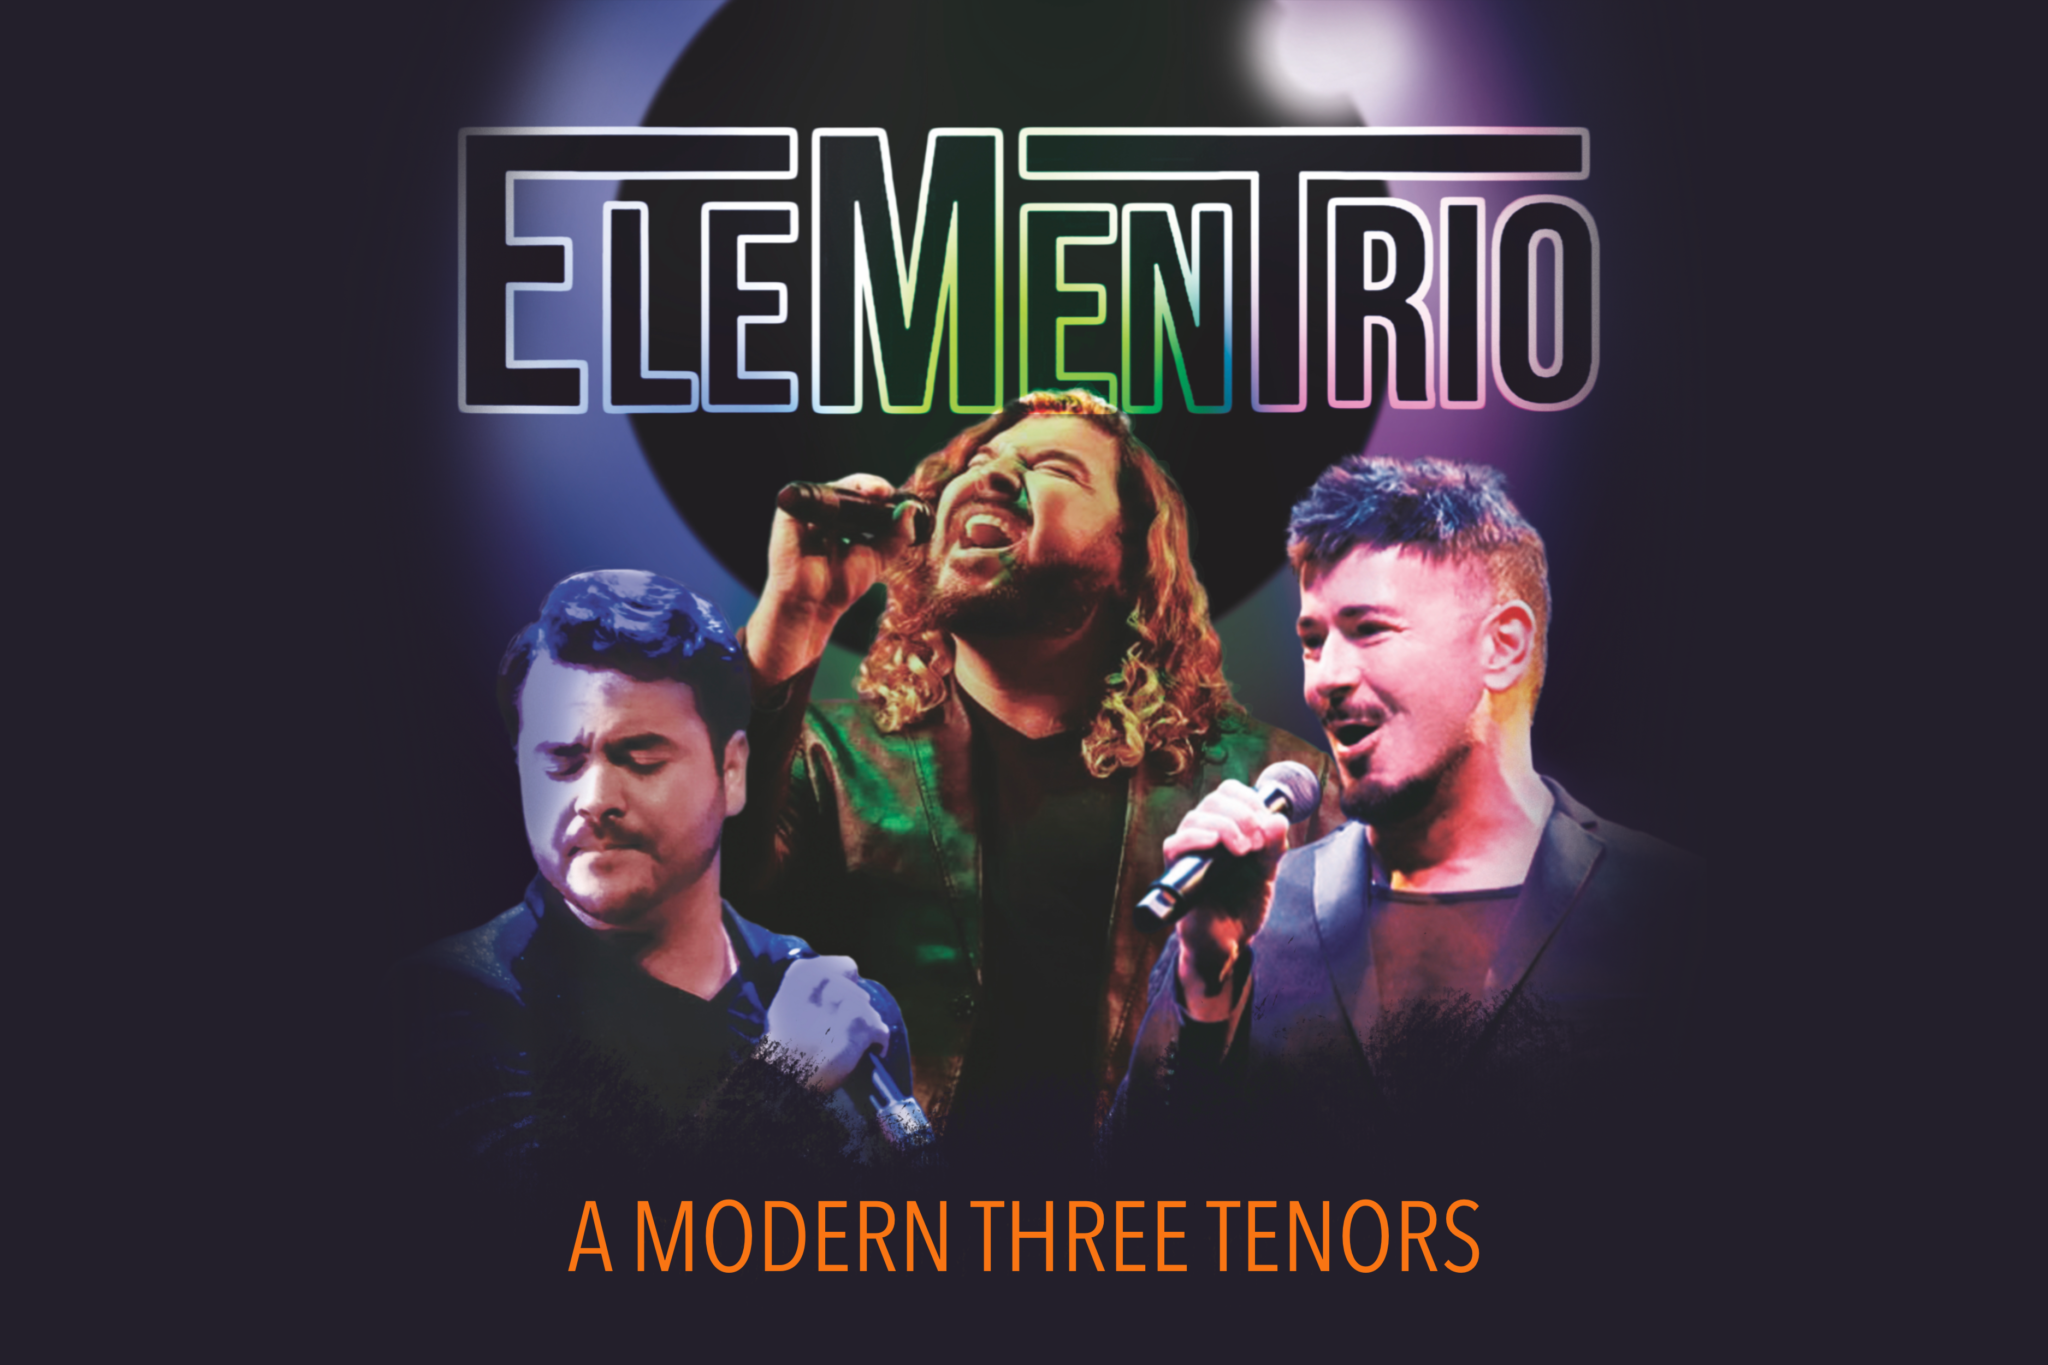 Hailed as “A Modern Three Tenors” EleMenTrio performs at the Herberger Theater on April 5